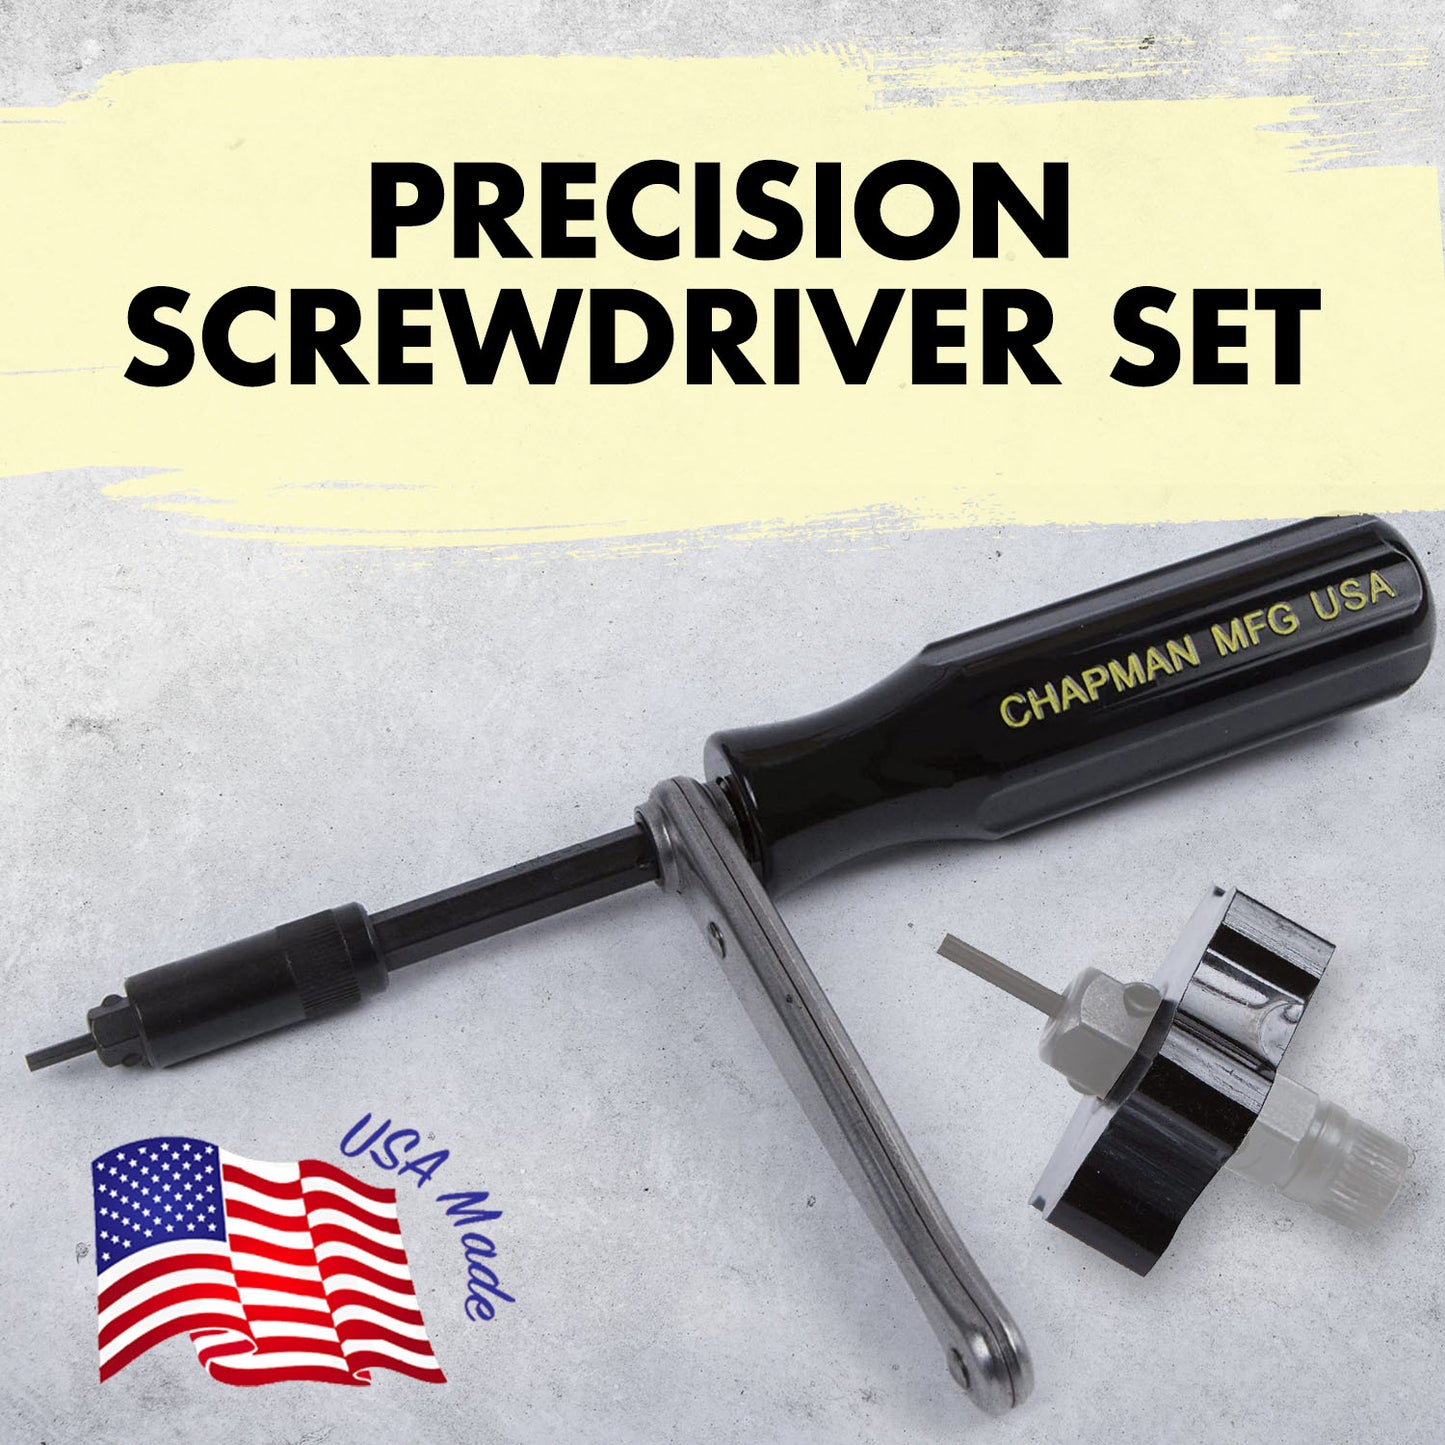 Precision Screwdriver Set  - Spinner Top included in set is great for tight spaces or starting screws | Chapman MFG